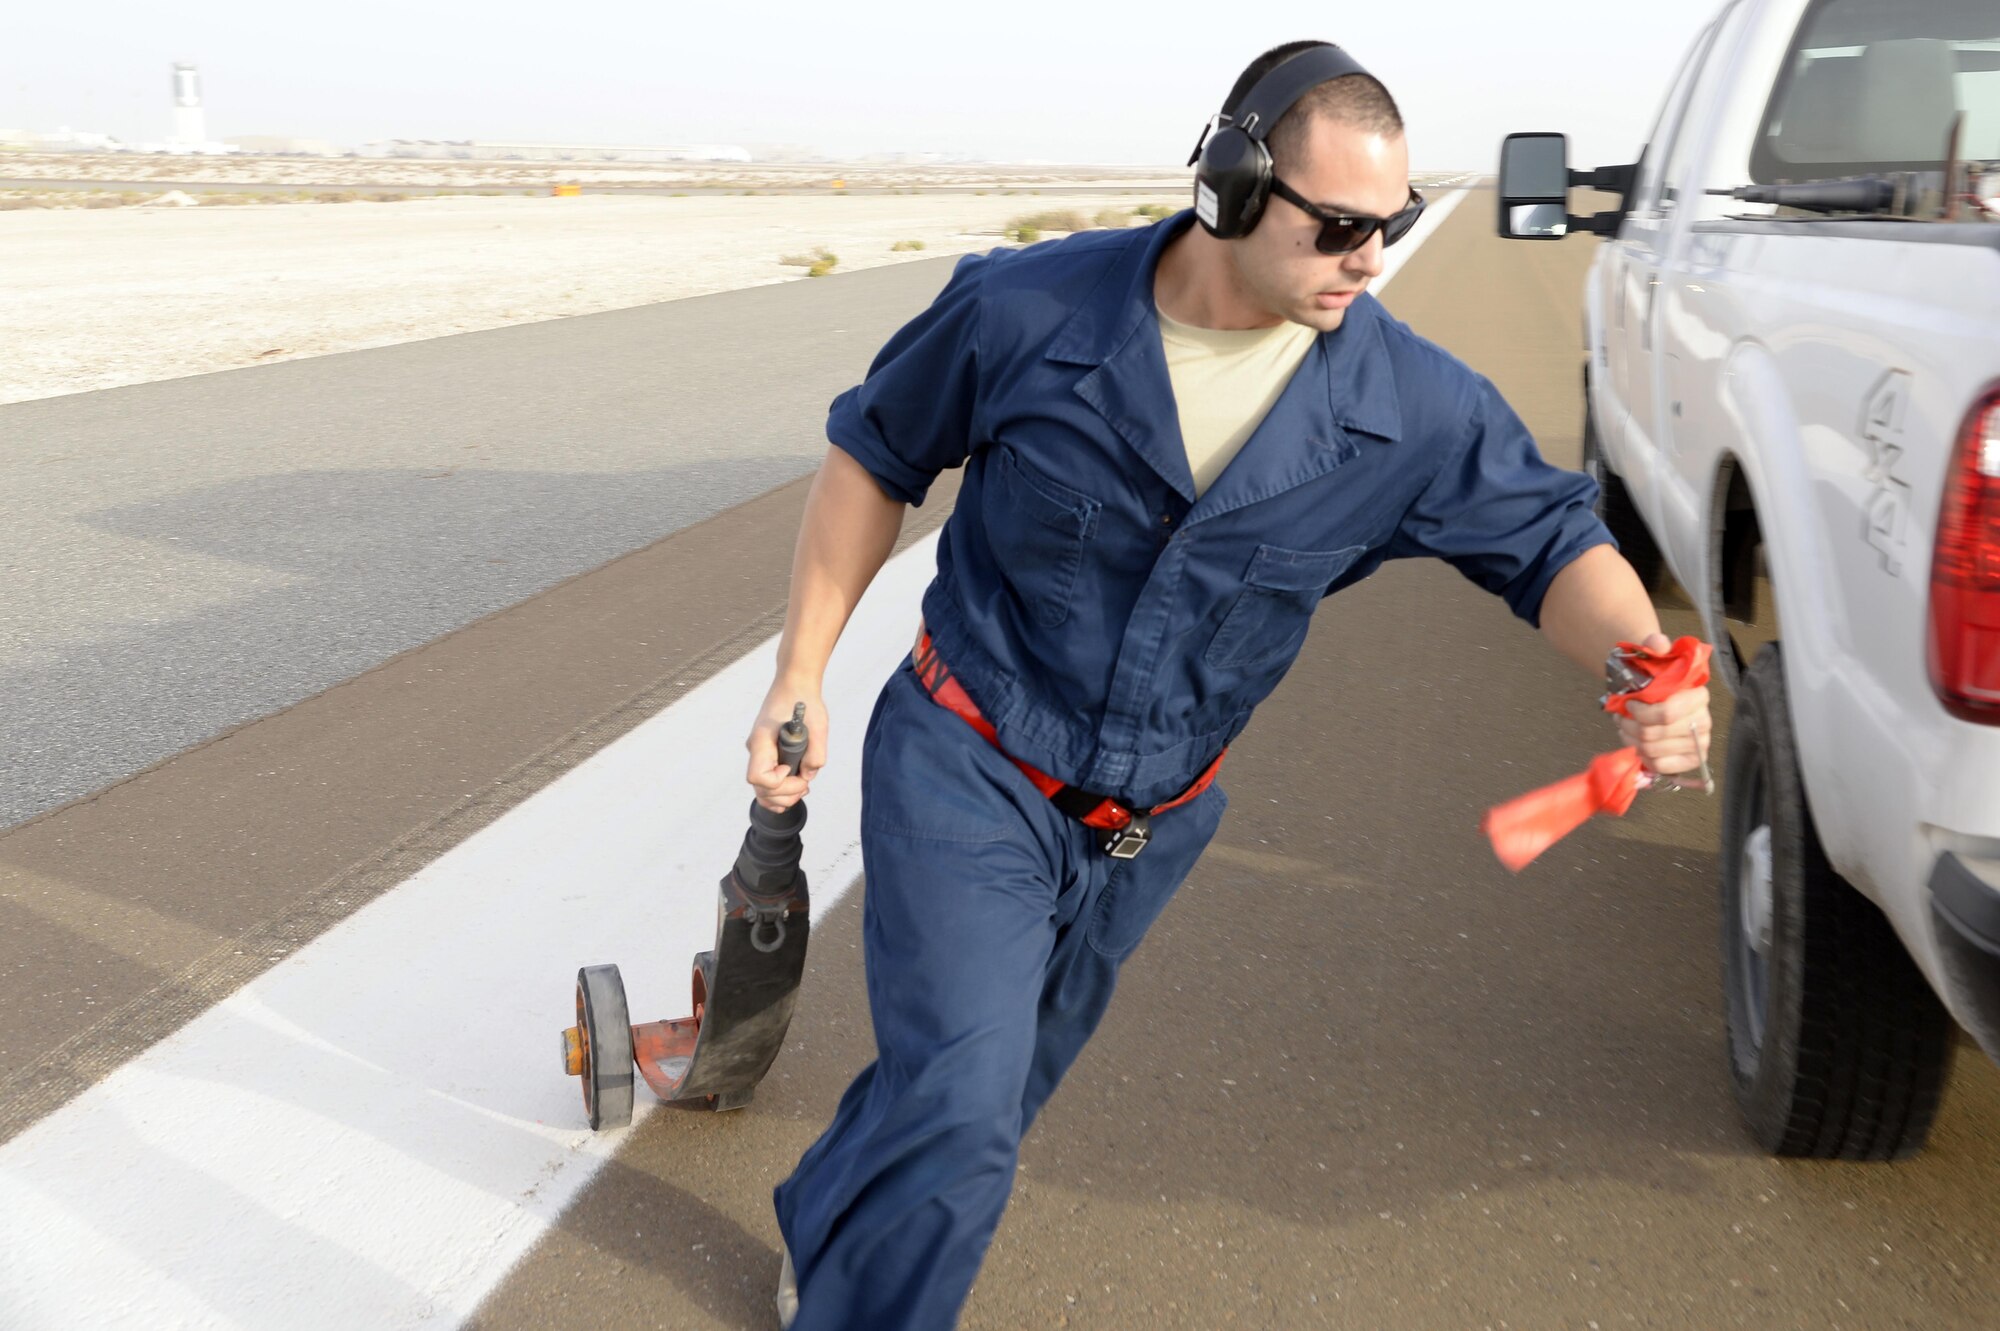 Staff Sgt. Ruben, Dragon Aircraft Maintenance Unit, prepares to install a pogo wheel on a U-2 Dragon Lady at an undisclosed location in Southwest Asia Feb. 9, 2015. These bicycle-type wheels are used to support the aircraft's extended wingspan during taxi for all takeoffs and landings. It’s the unique design that gives the U-2 its remarkable performance and makes flying very challenging. Ruben is currently deployed from Beale Air Force Base, Calif. (U.S. Air Force photo/Tech. Sgt. Marie Brown)